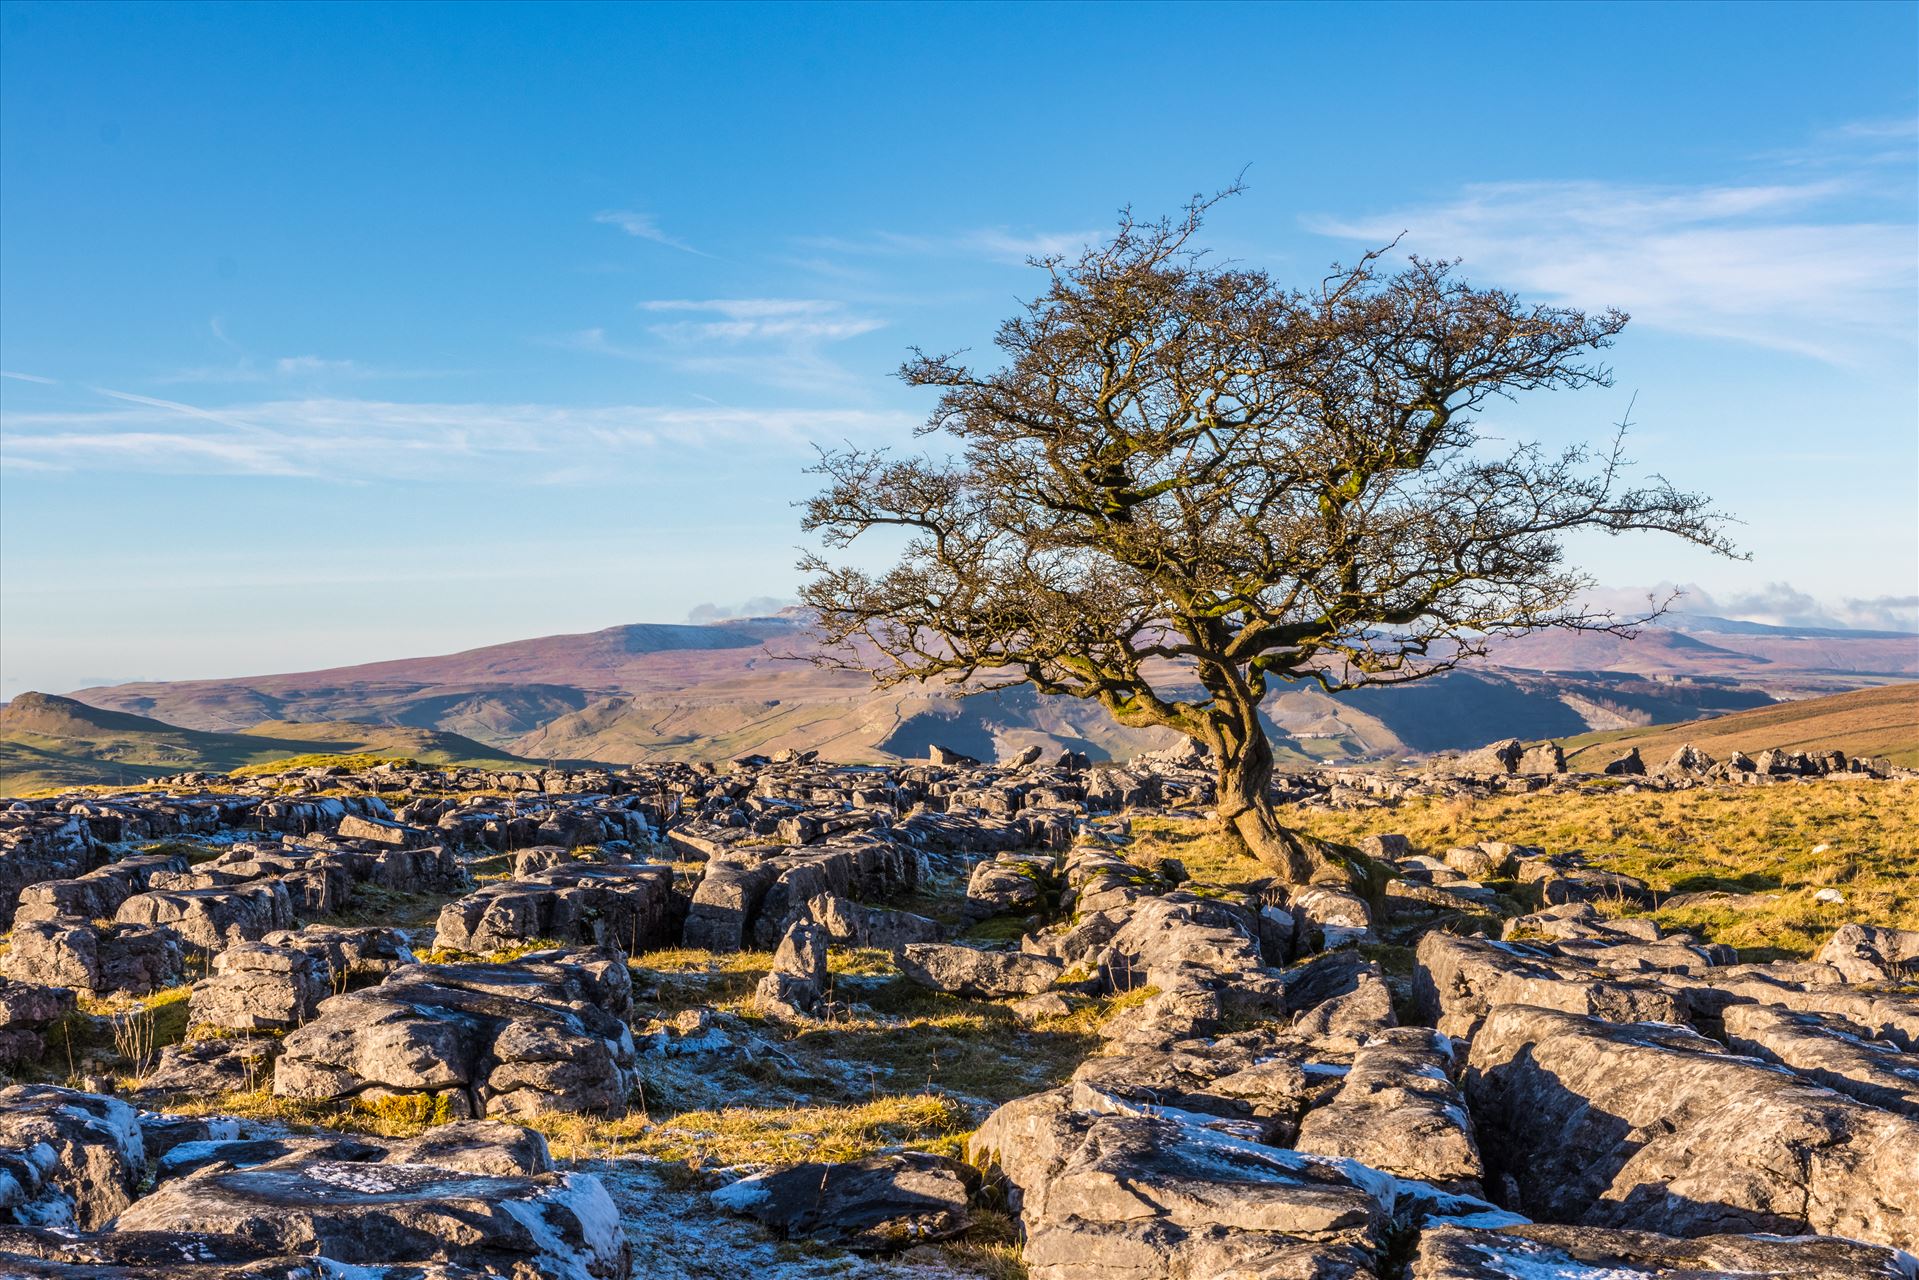 Lone Tree at Winskill Stones Winskill Stones is situated on the road towards Maham from the village of Langcliffe and this Lone Tree sits on the Limestone Paving with an amazing view. by Tony Keogh Photography